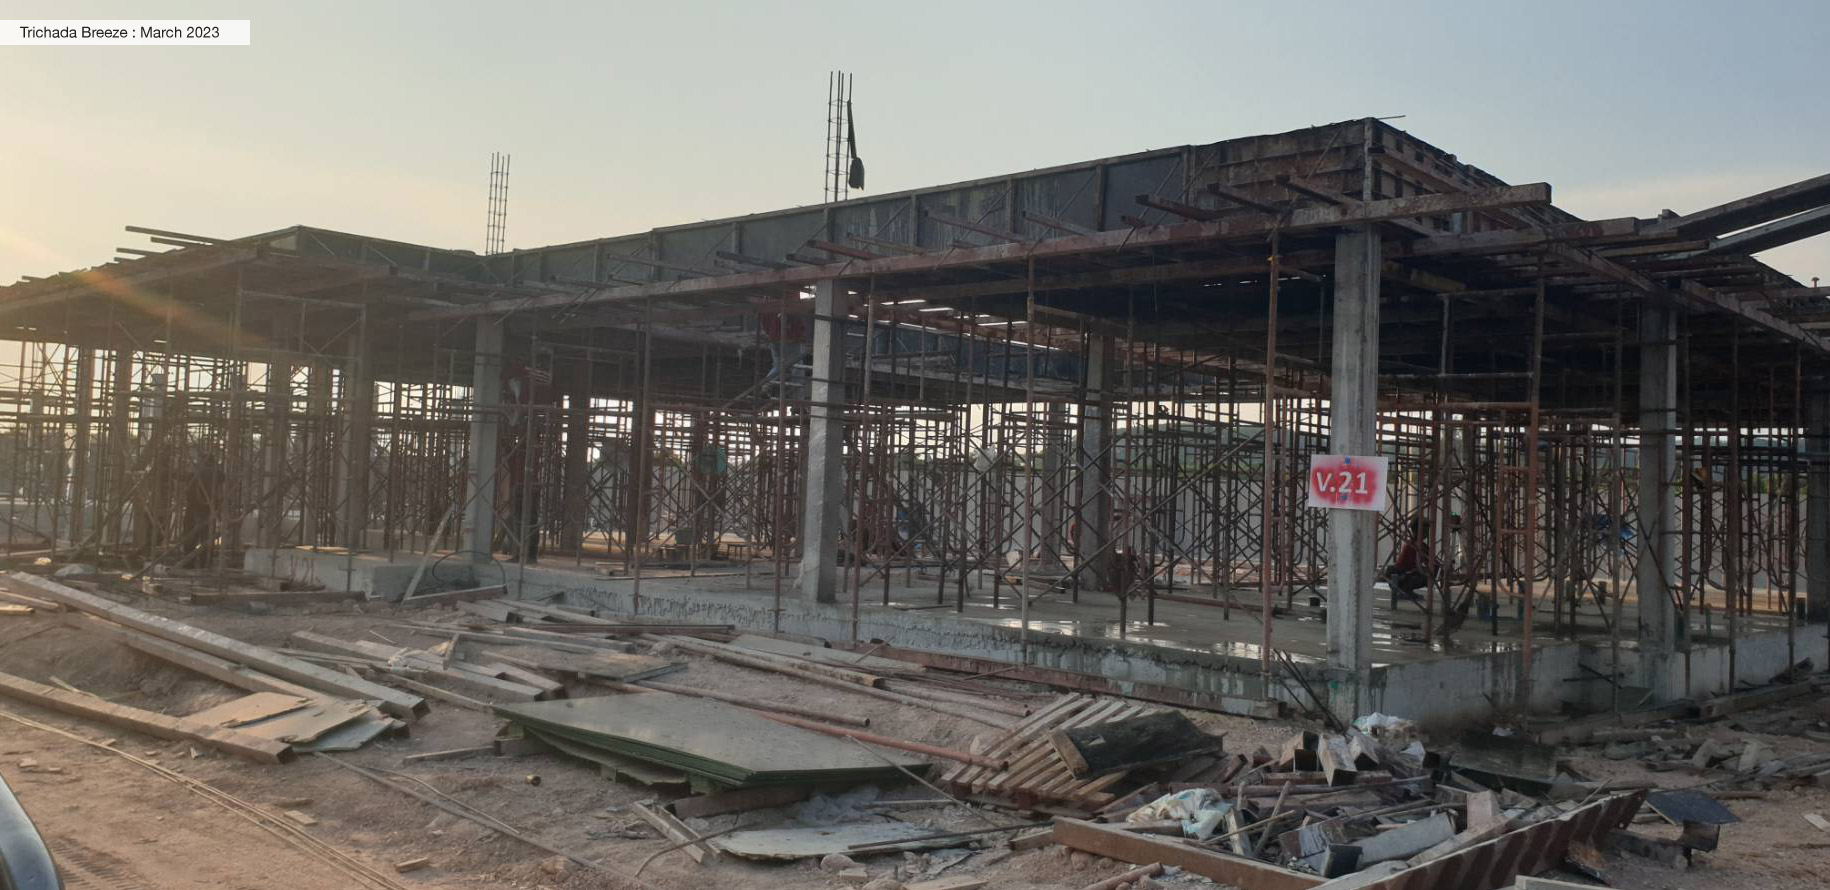 Early stage construction of a Trichada Breeze, Mar 2023